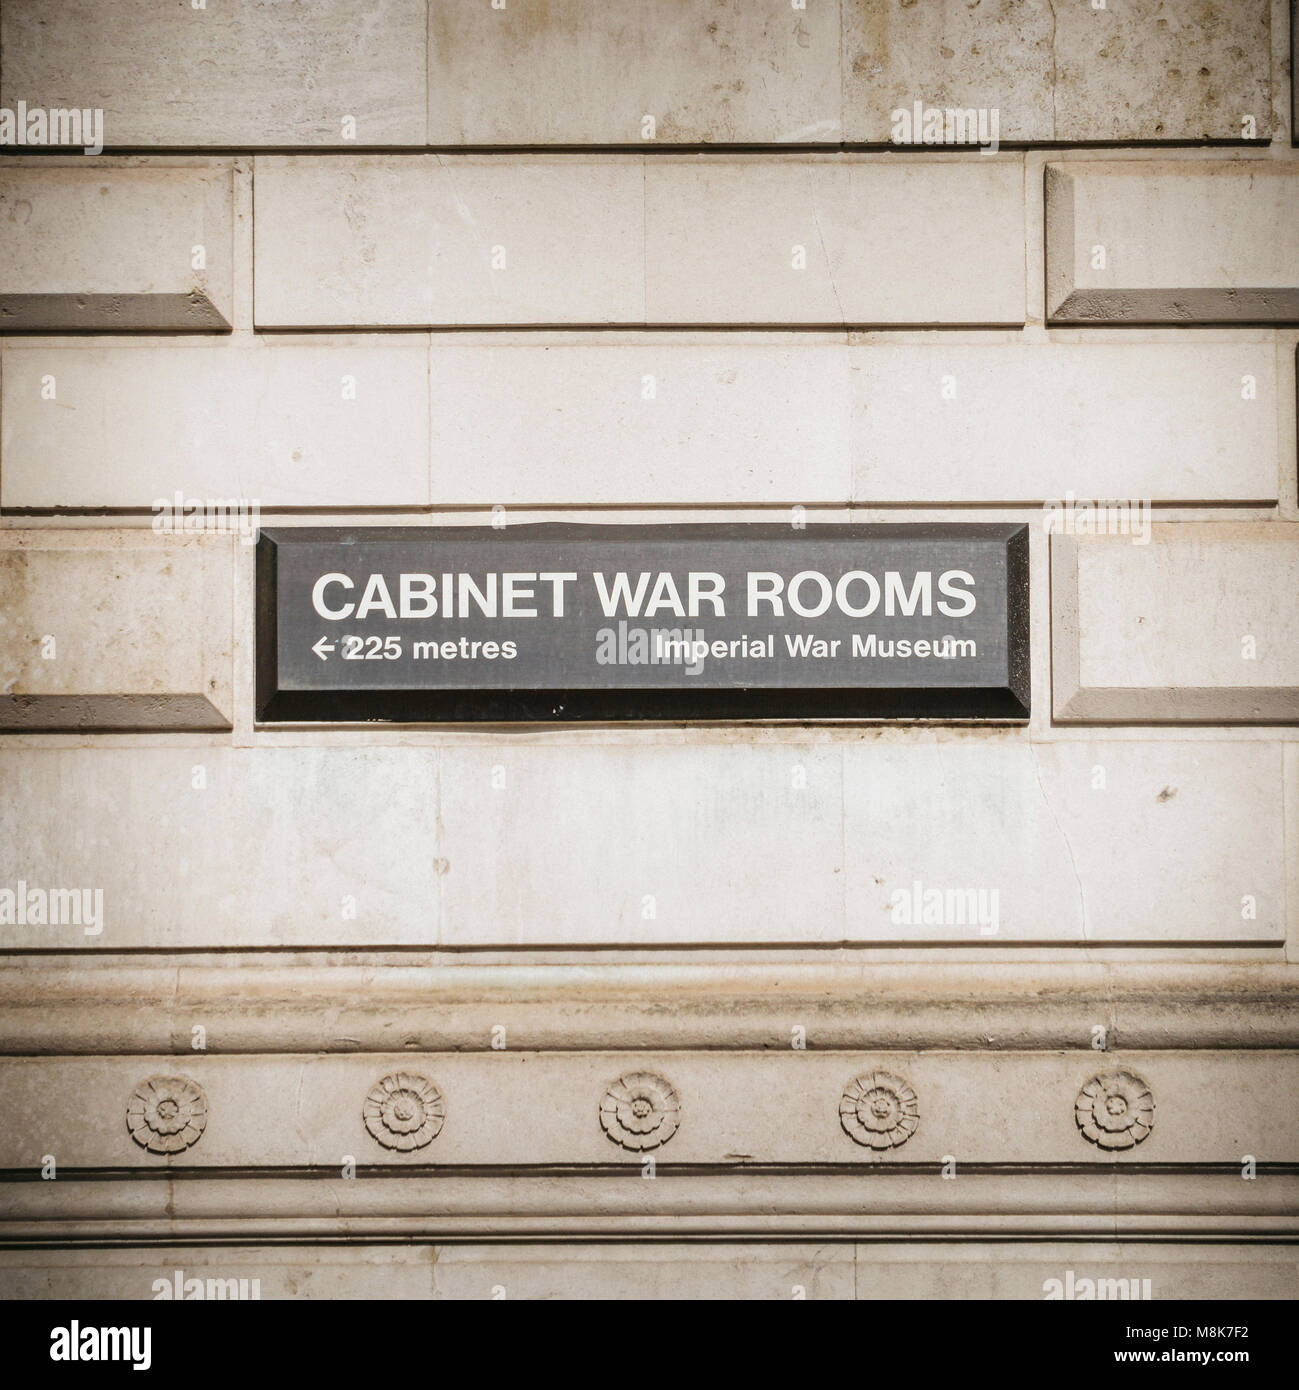 Sign towards Winston Churchill's Cabinet War Room where him and his canbinet met in this bunker codenamed Paddock in Dollis Hill, London Stock Photo